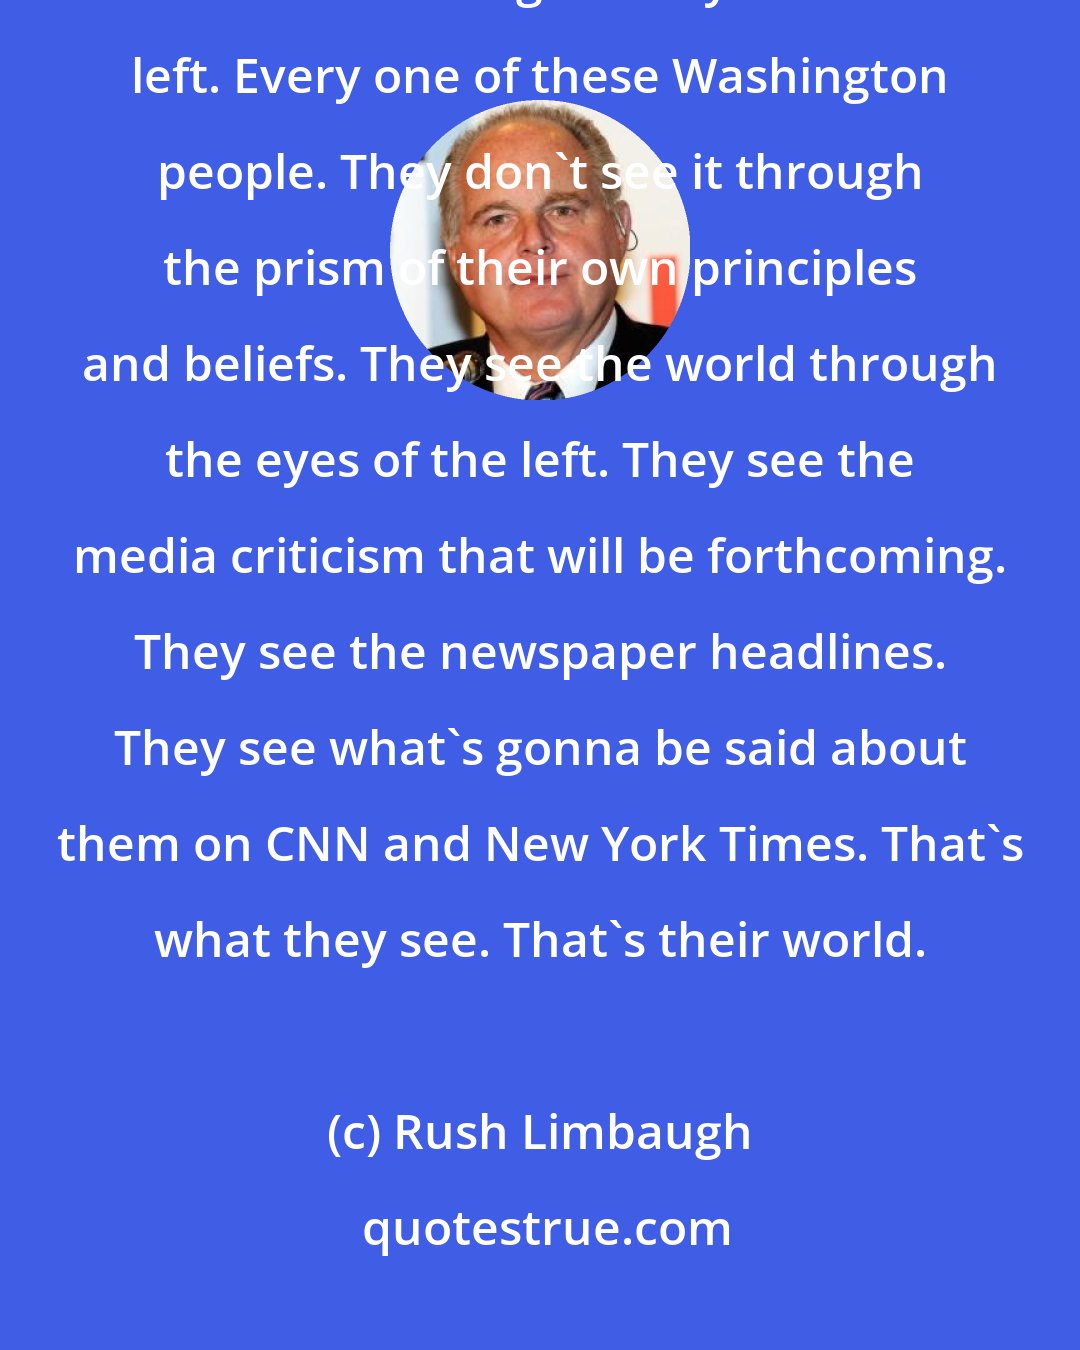 Rush Limbaugh: Remember, folks, every one of these Republicans in Senate sees the world through the eyes of the left. Every one of these Washington people. They don't see it through the prism of their own principles and beliefs. They see the world through the eyes of the left. They see the media criticism that will be forthcoming. They see the newspaper headlines. They see what's gonna be said about them on CNN and New York Times. That's what they see. That's their world.